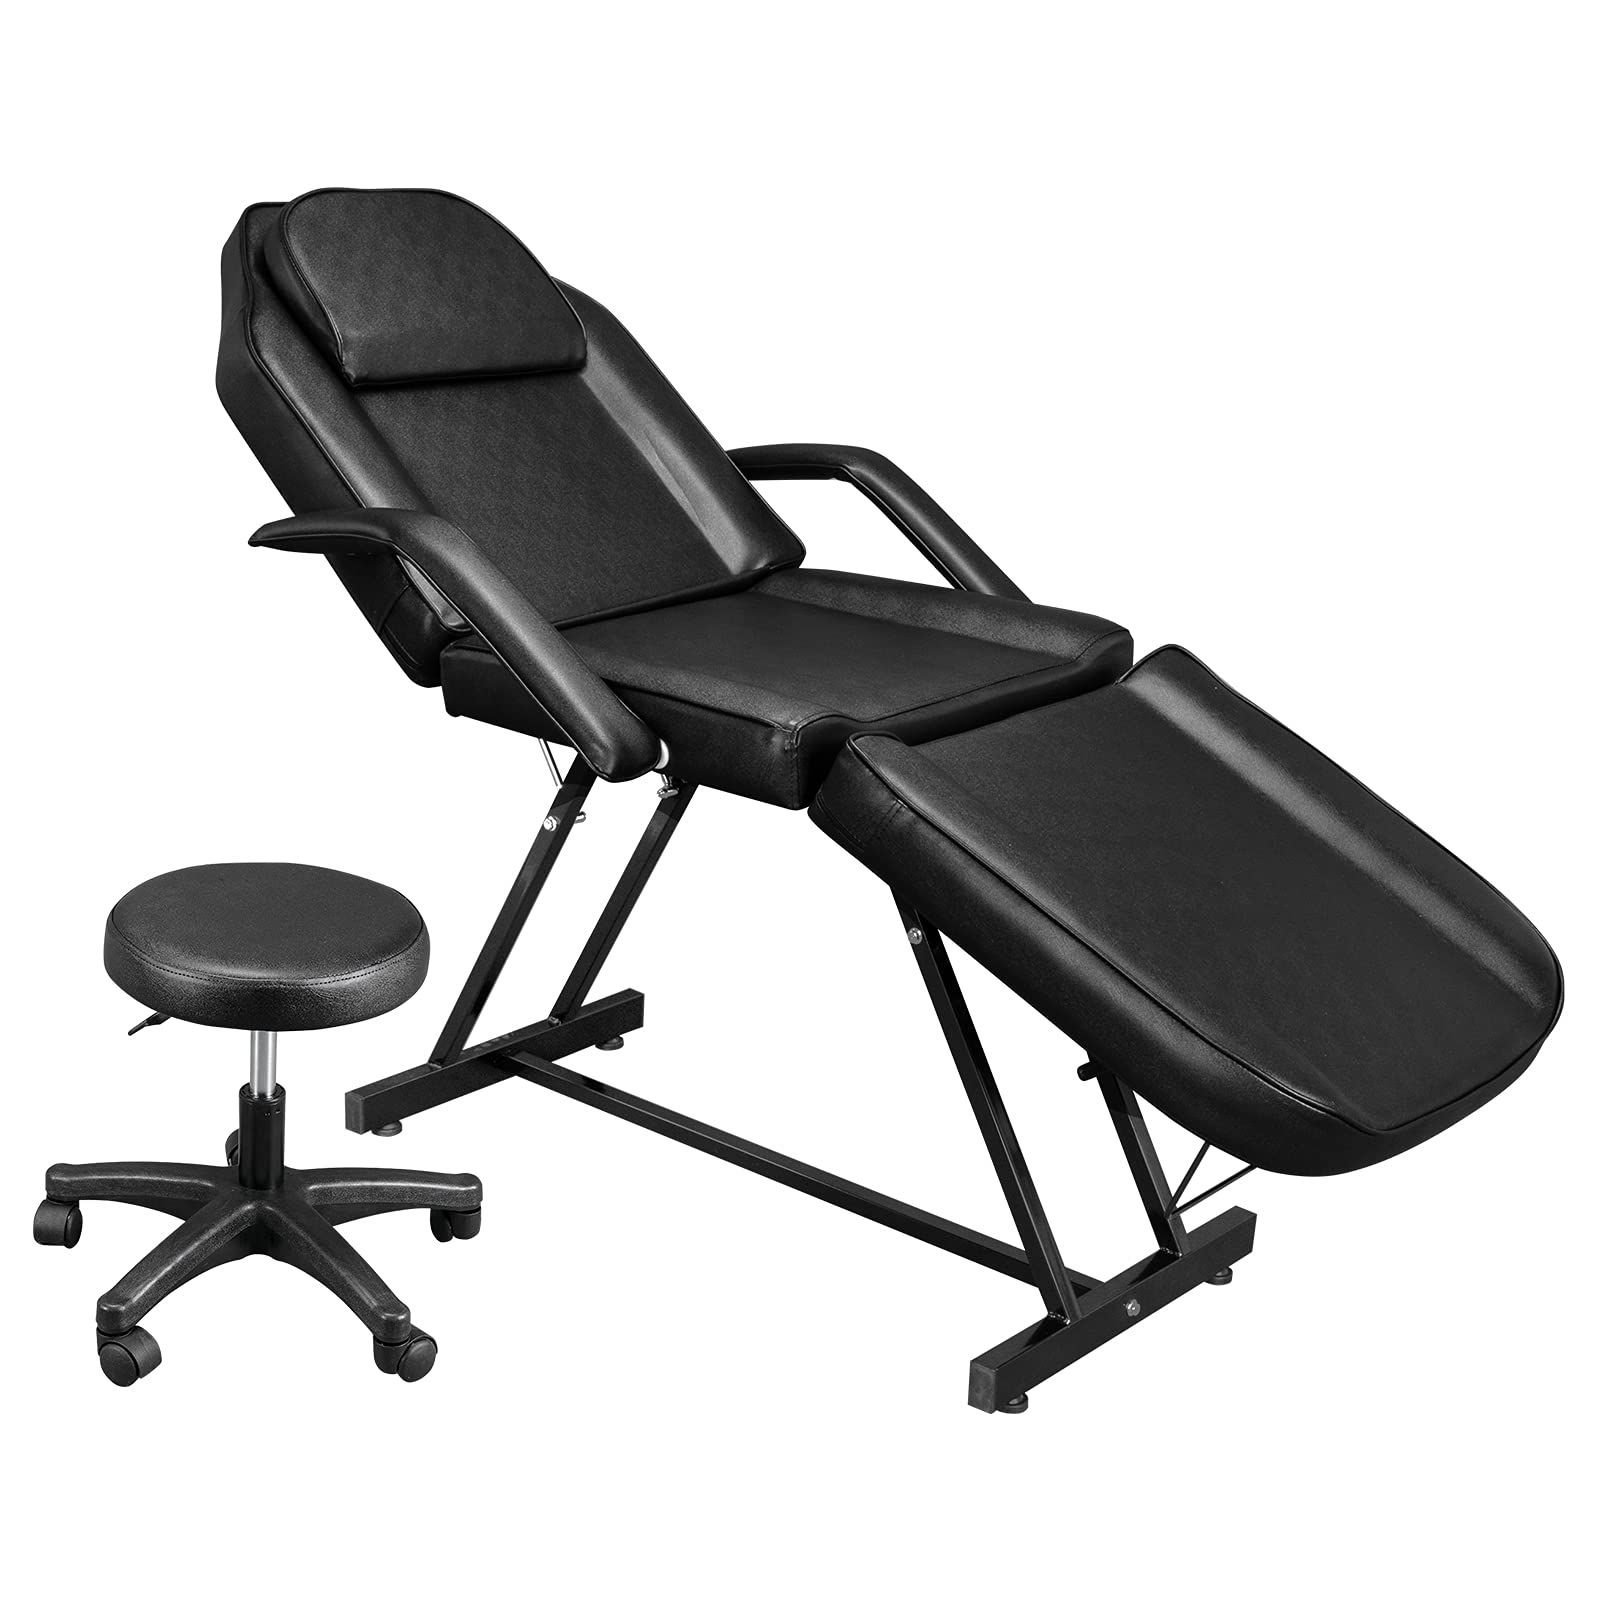 OmySalon Salon Tattoo Chair Esthetician Bed Multi-Purpose Facial Bed Chair with Hydraulic Stool Black/White